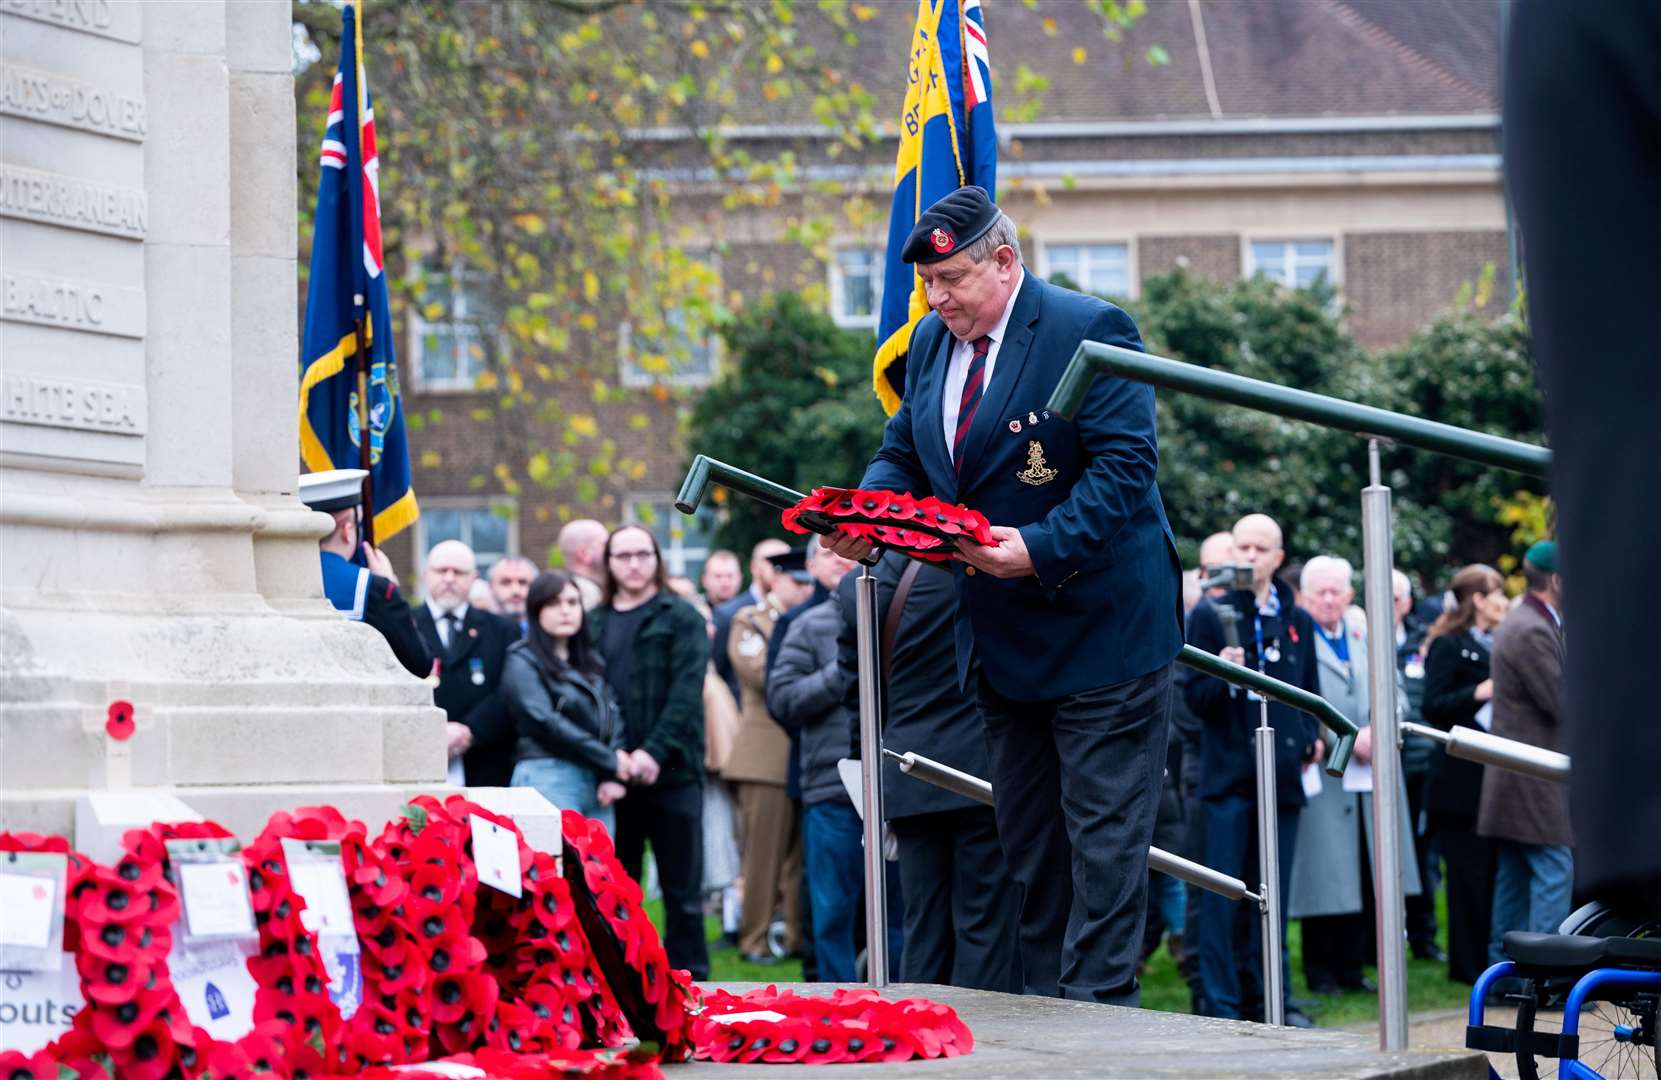 Wreaths were laid during the Remembrance Sunday service held at Tower Gardens in King's Lynn last year. Picture: Ian Burt